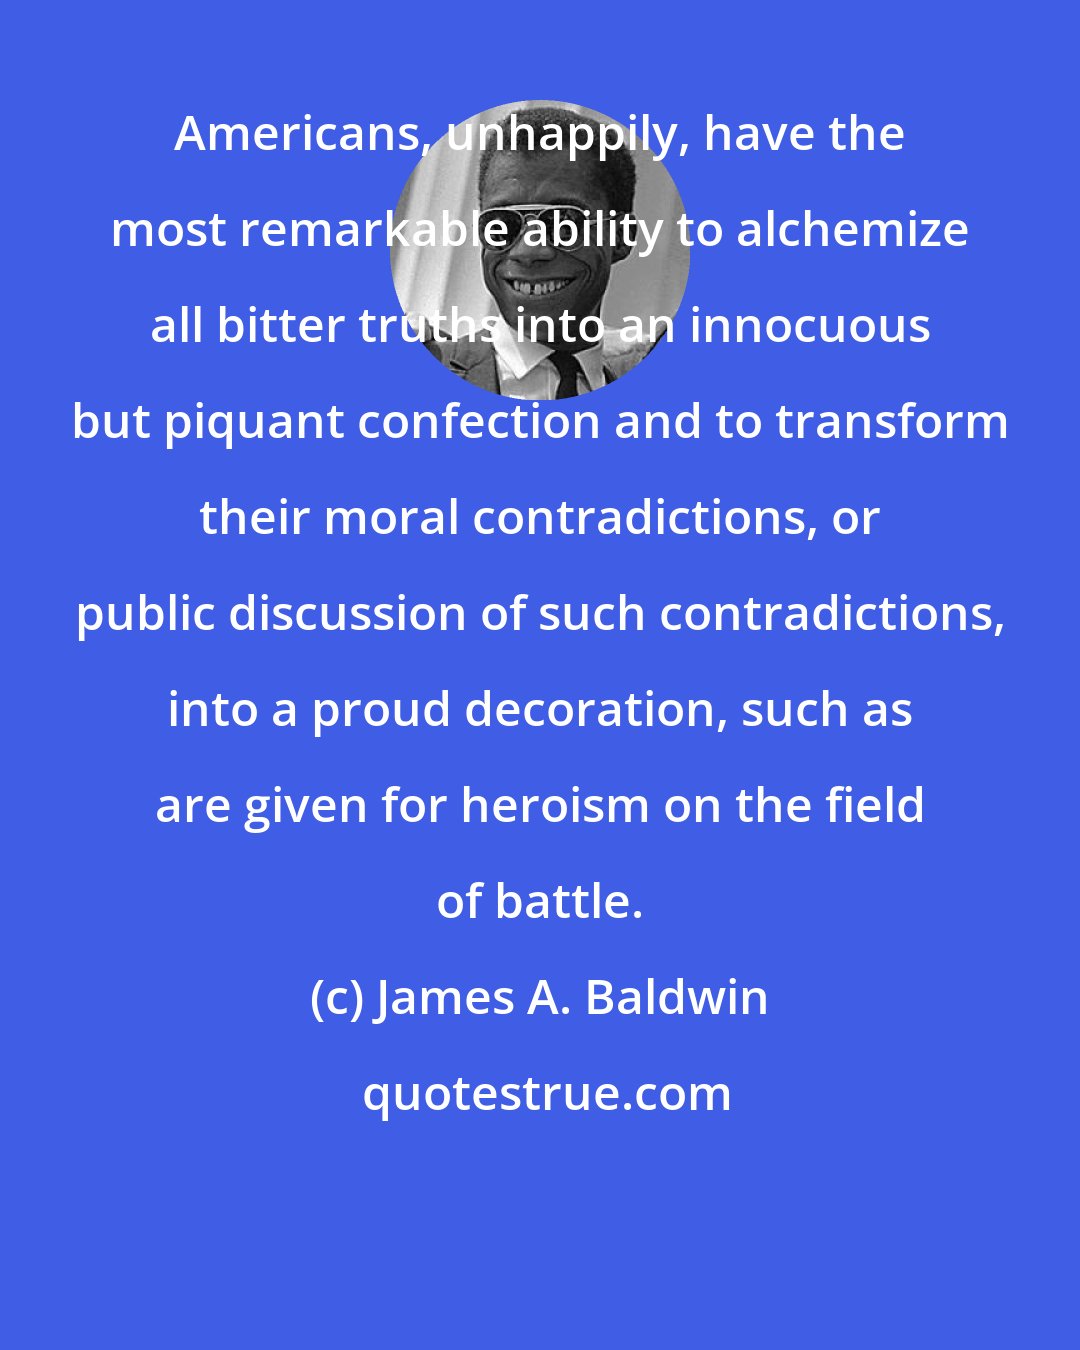 James A. Baldwin: Americans, unhappily, have the most remarkable ability to alchemize all bitter truths into an innocuous but piquant confection and to transform their moral contradictions, or public discussion of such contradictions, into a proud decoration, such as are given for heroism on the field of battle.